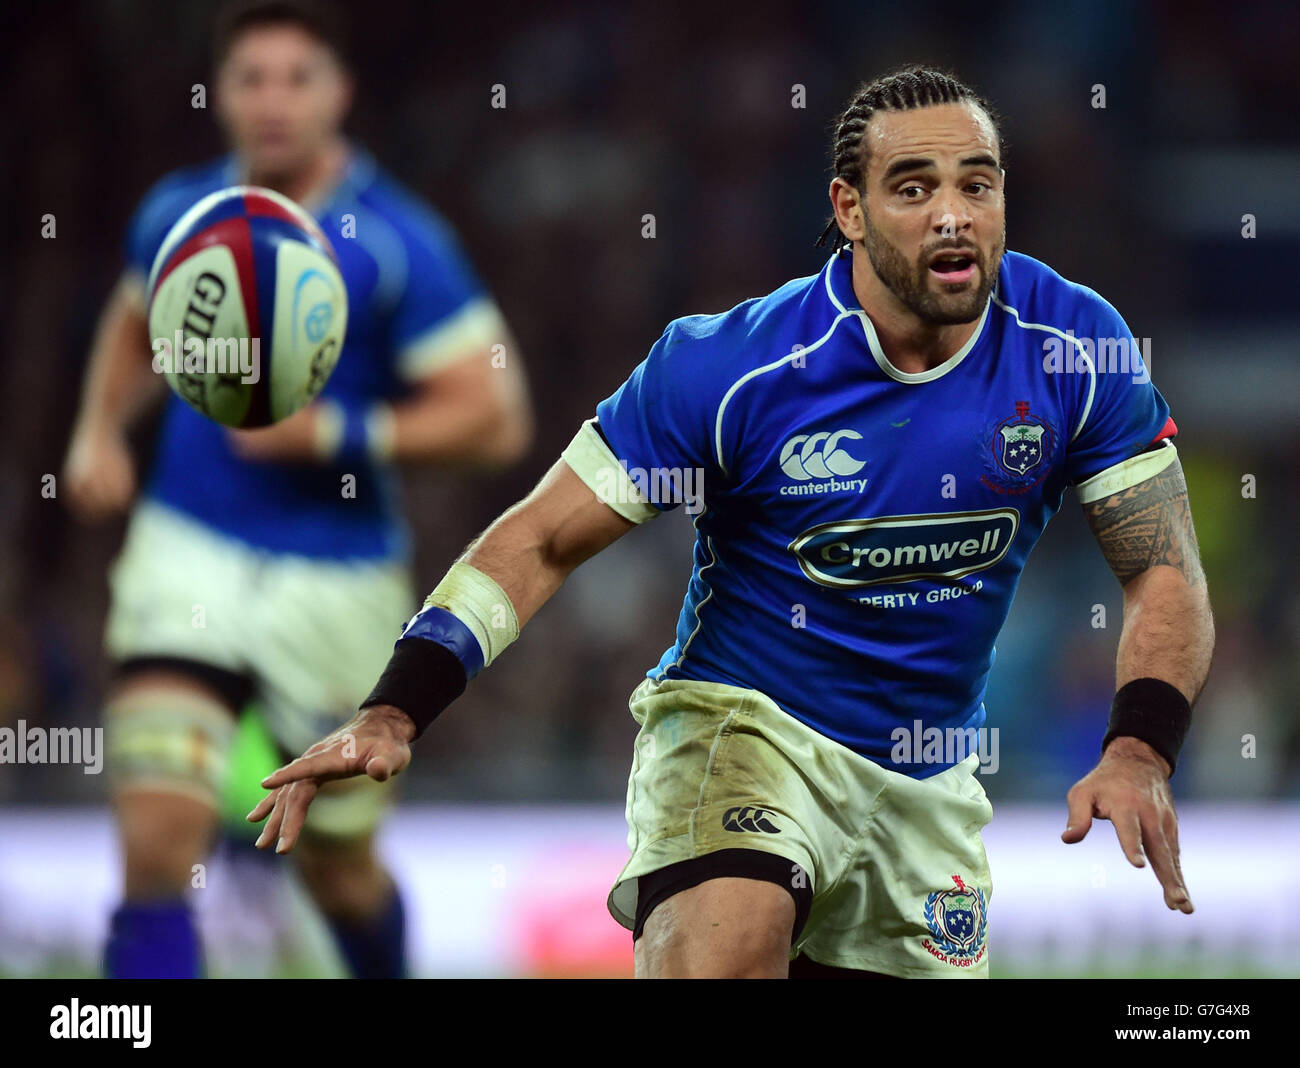 Samoa's Kahn Fotualii during the QBE International match at Twickenham, London. PRESS ASSOCIATION Photo. Picture date: Saturday November 22, 2014. See PA Story RUGBYU England. Photo credit should read: Adam Davy/PA Wire. Stock Photo